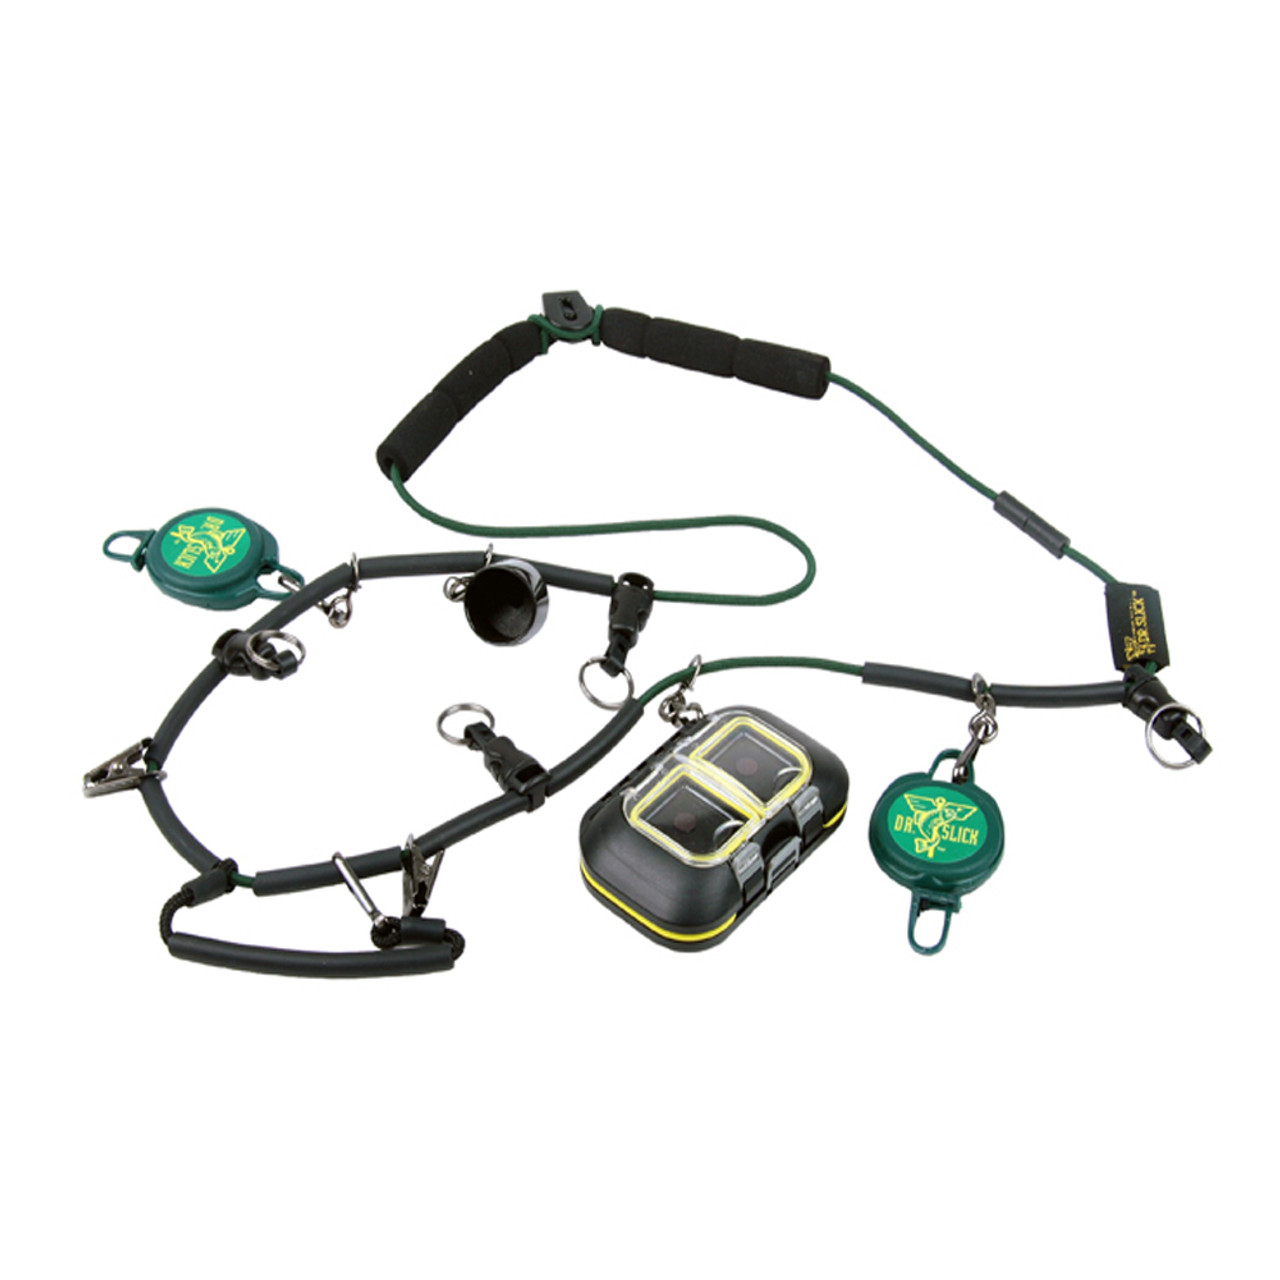 Dr. Slick Elastic Lanyard / Necklace - Fly Fishing - Ed's Fly Shop